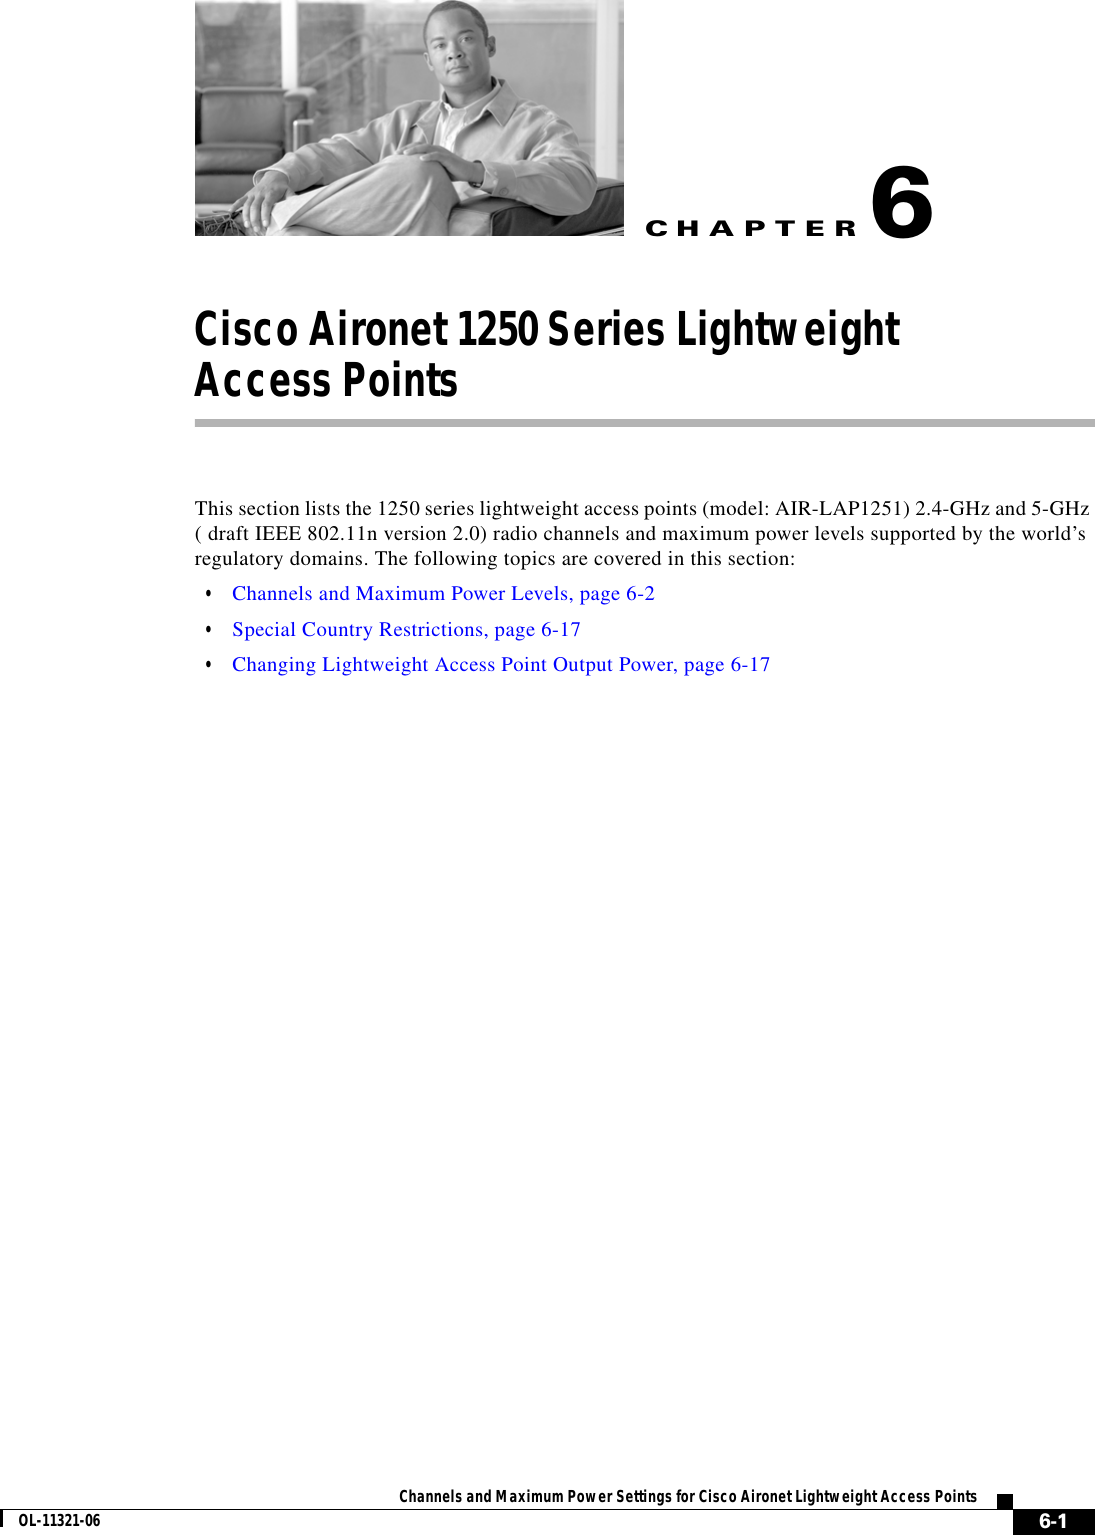 CHAPTER 6-1Channels and Maximum Power Settings for Cisco Aironet Lightweight Access PointsOL-11321-066Cisco Aironet 1250 Series Lightweight  Access Points This section lists the 1250 series lightweight access points (model: AIR-LAP1251) 2.4-GHz and 5-GHz ( draft IEEE 802.11n version 2.0) radio channels and maximum power levels supported by the world’s regulatory domains. The following topics are covered in this section:  • Channels and Maximum Power Levels, page 6-2  • Special Country Restrictions, page 6-17  • Changing Lightweight Access Point Output Power, page 6-17